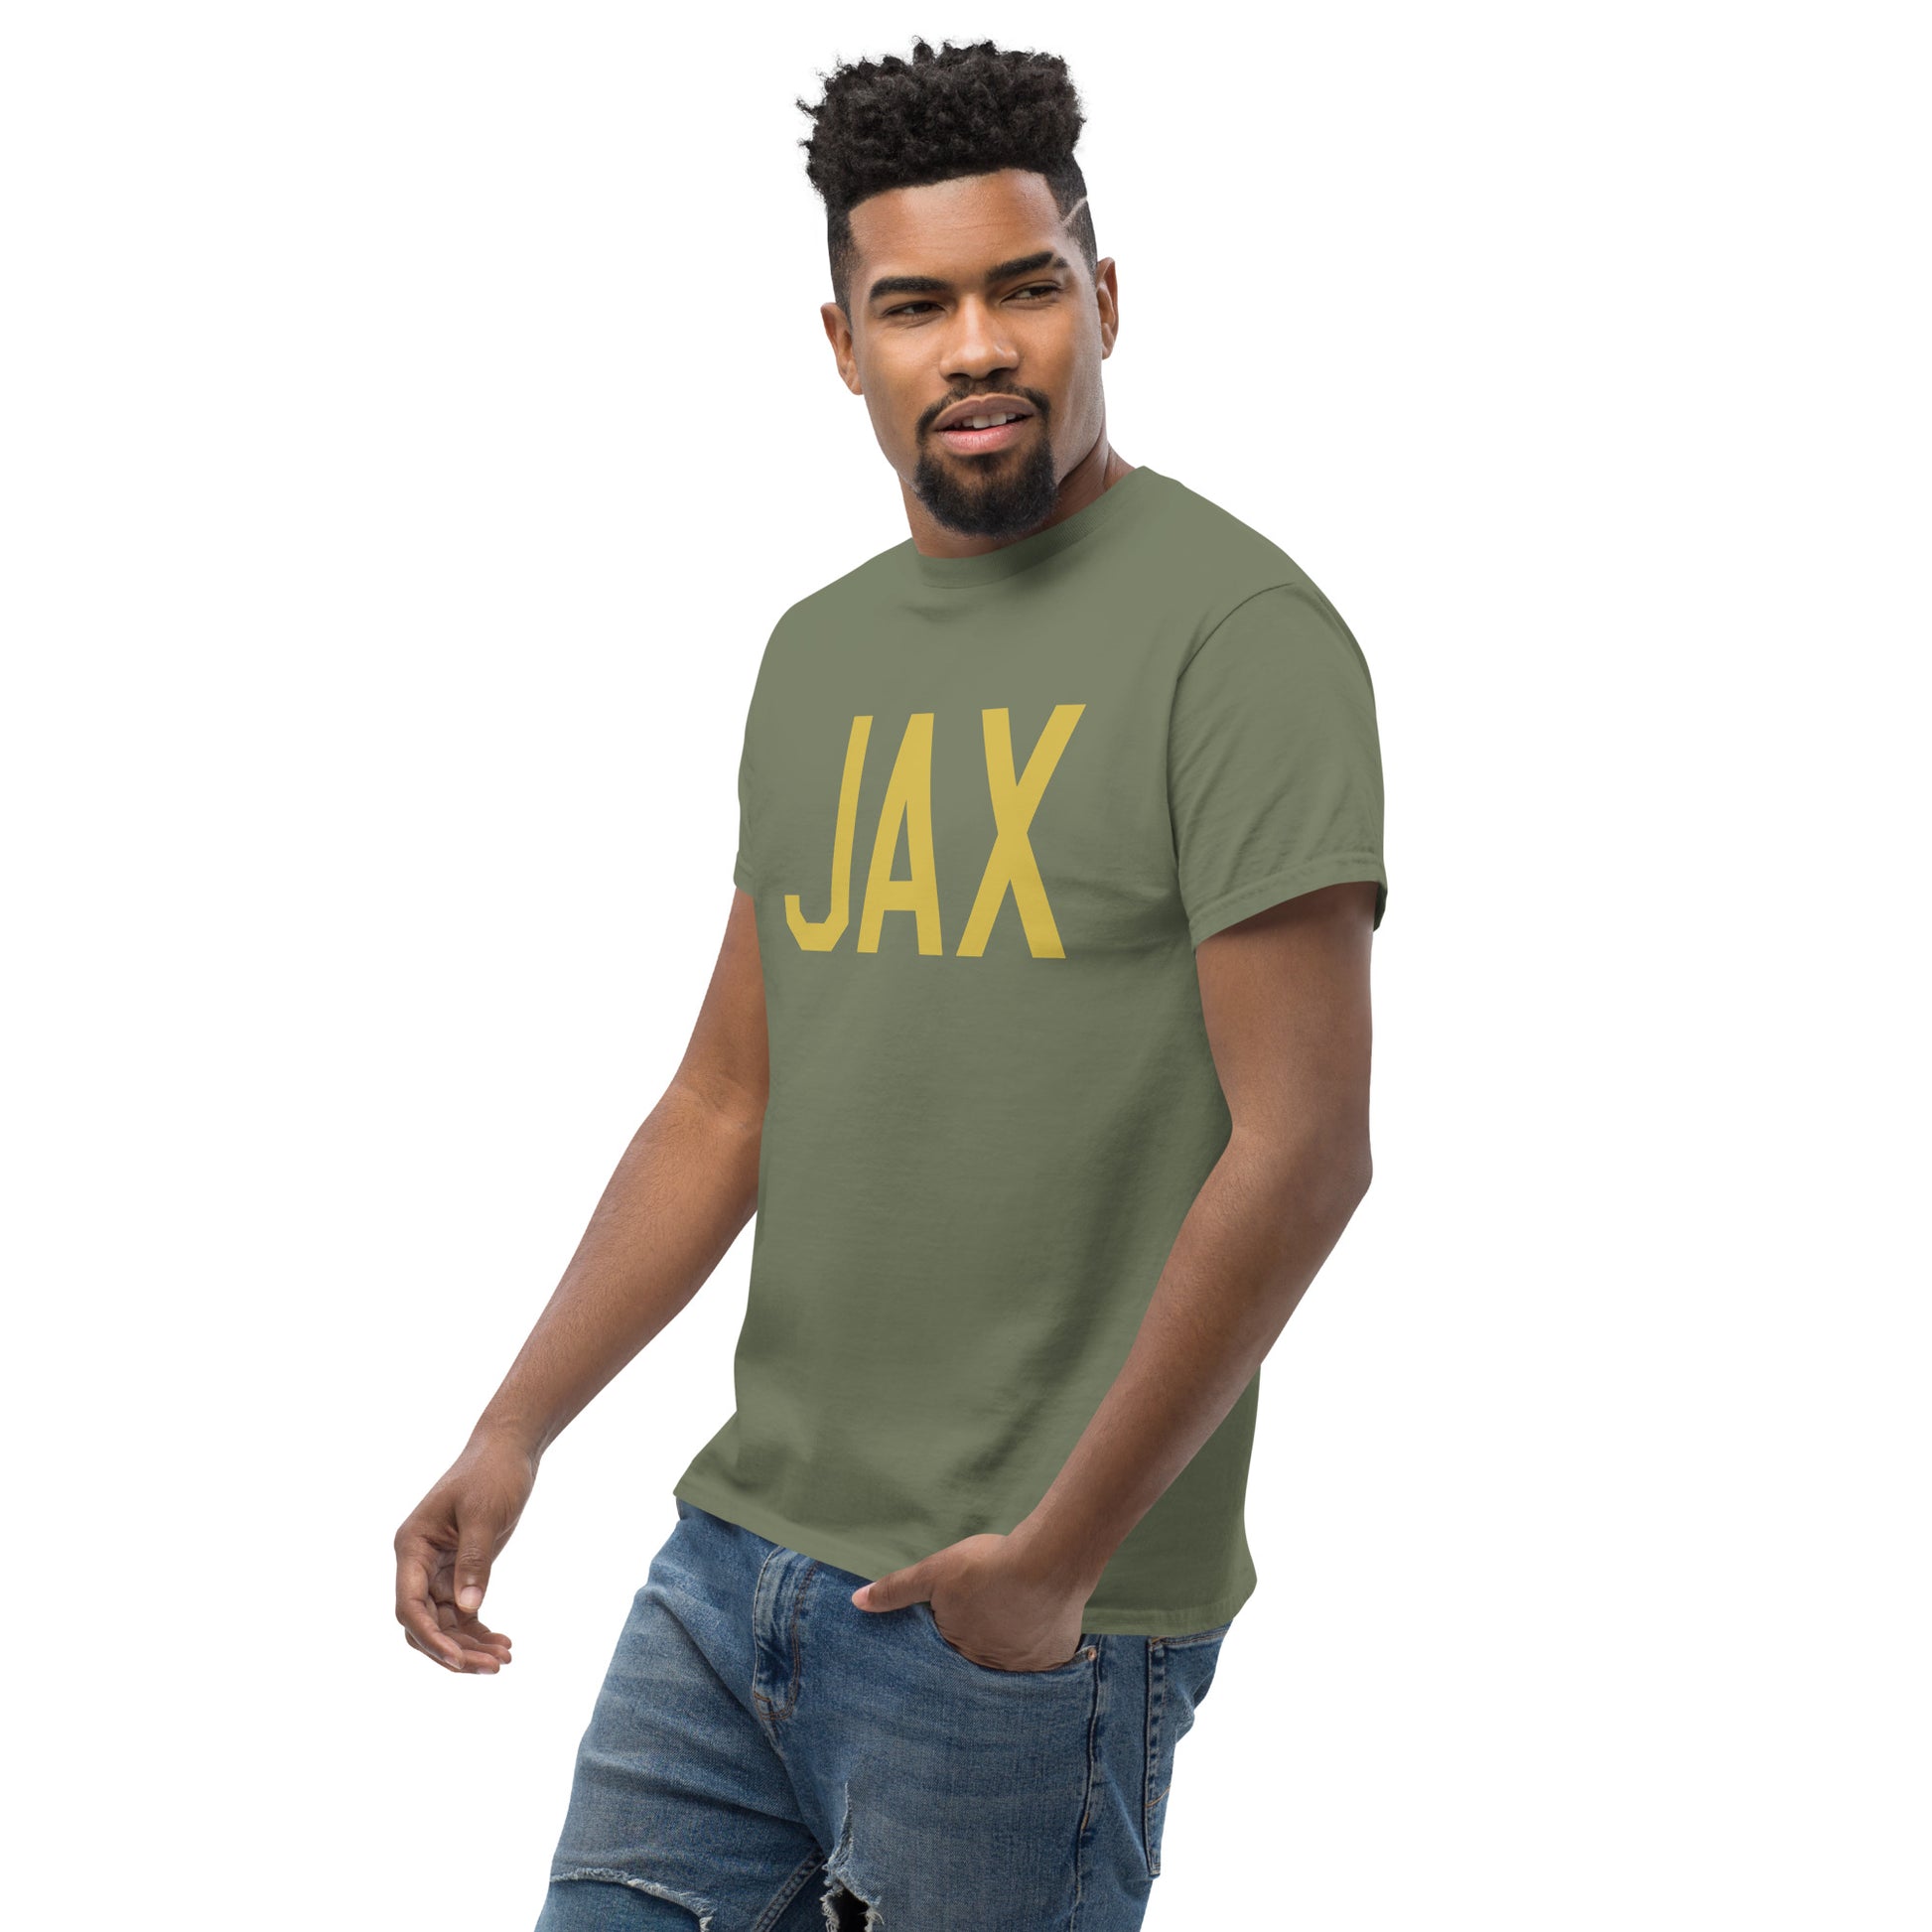 Aviation Enthusiast Men's Tee - Old Gold Graphic • JAX Jacksonville • YHM Designs - Image 07